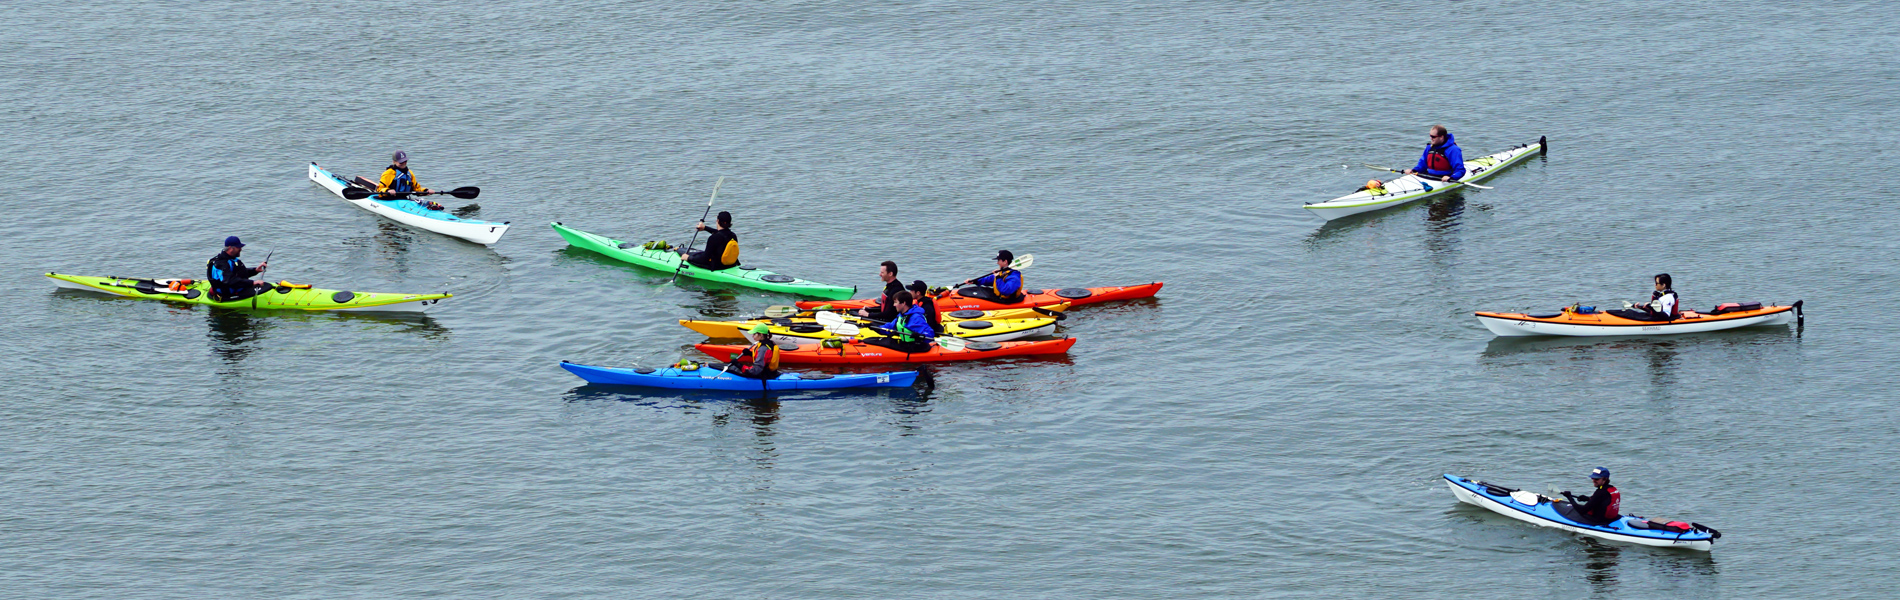 Learn Sea Kayaking Skills with a Paddle Canada Level-1 Sea Kayak Skills Course